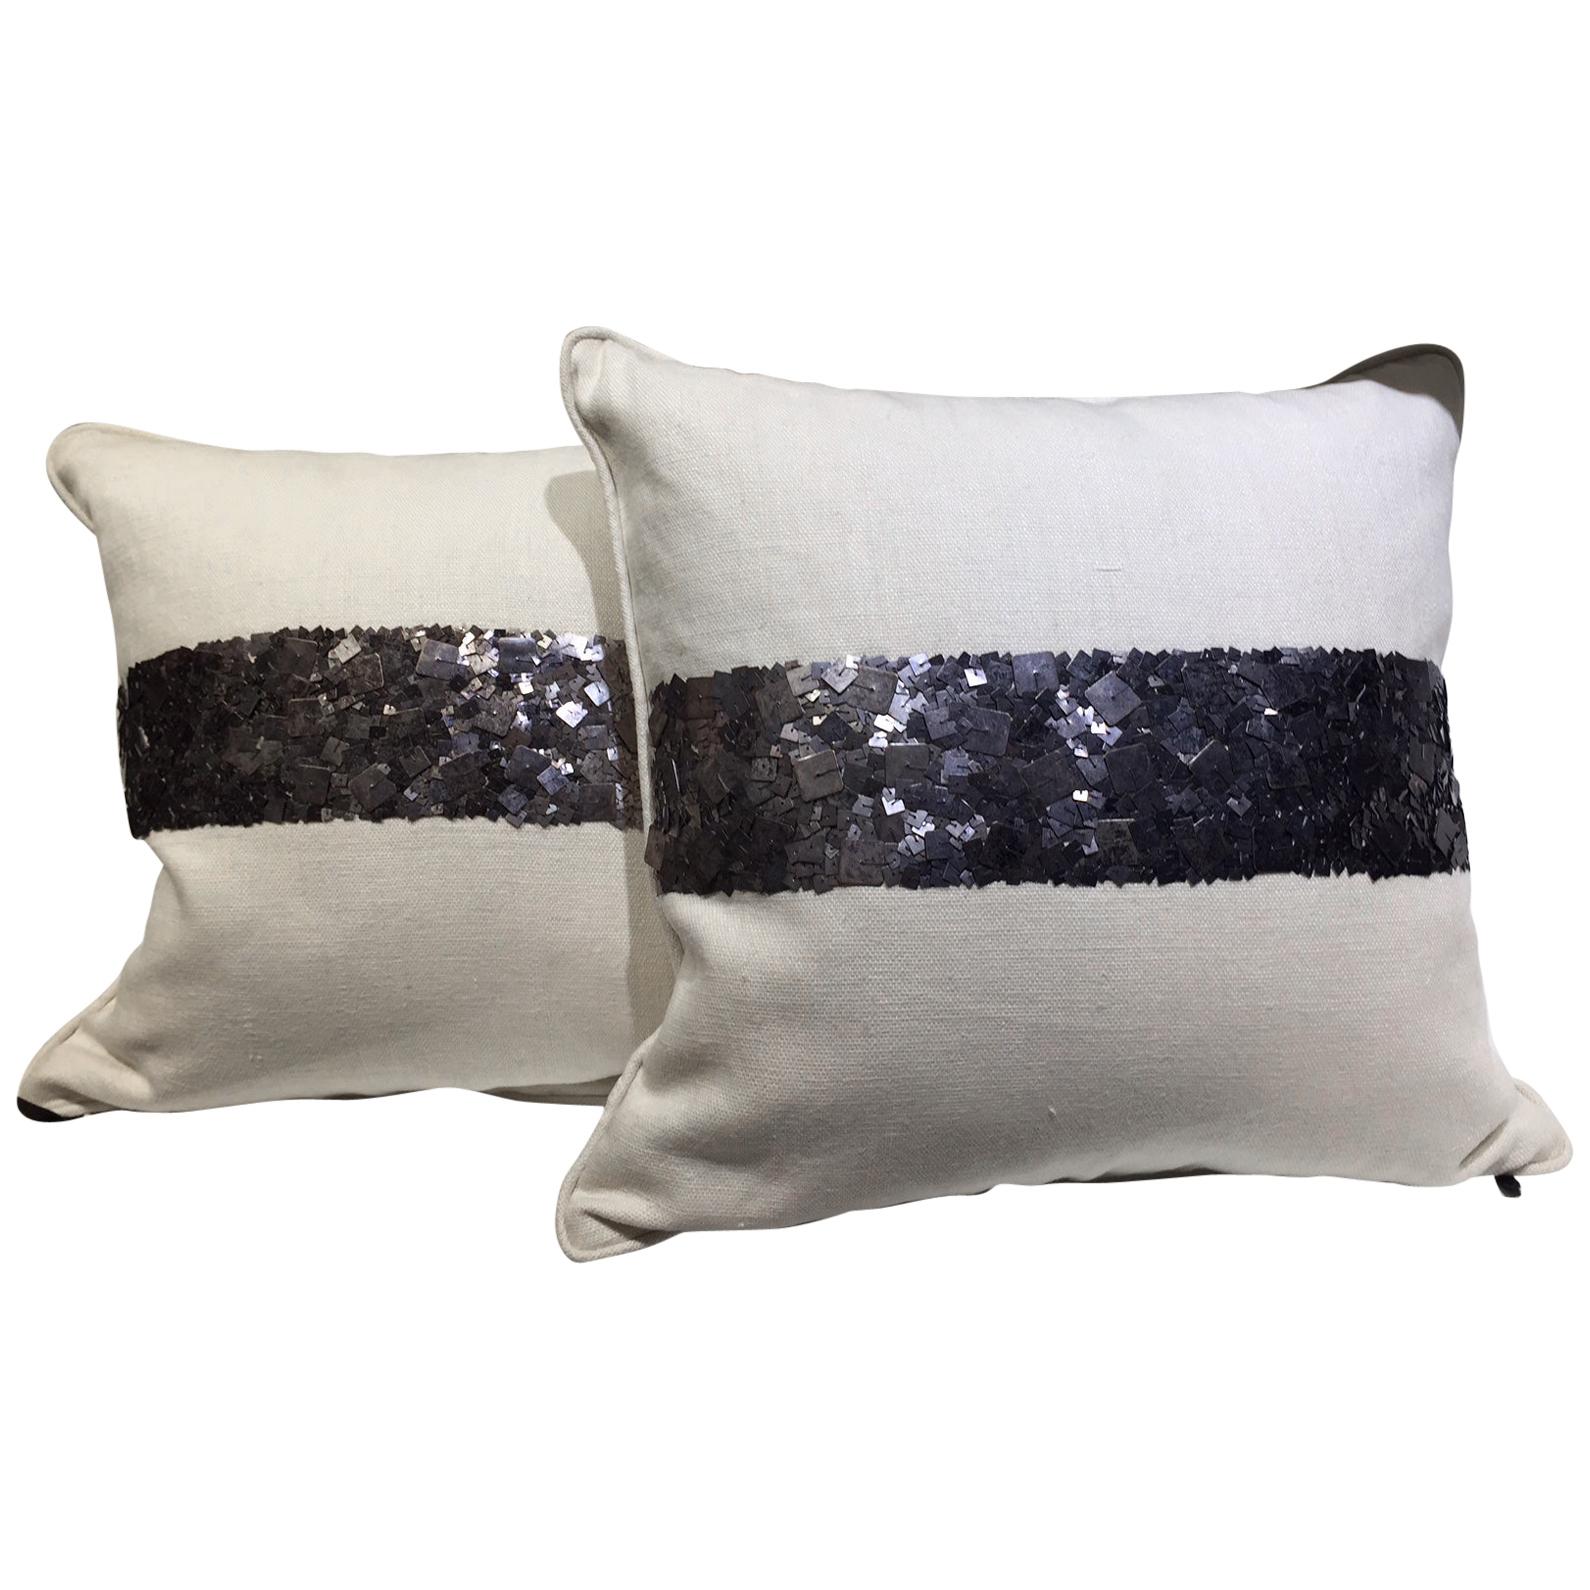 Pair of Linen Cushions Hand Embroidered with Dark Silver Metal Sequins